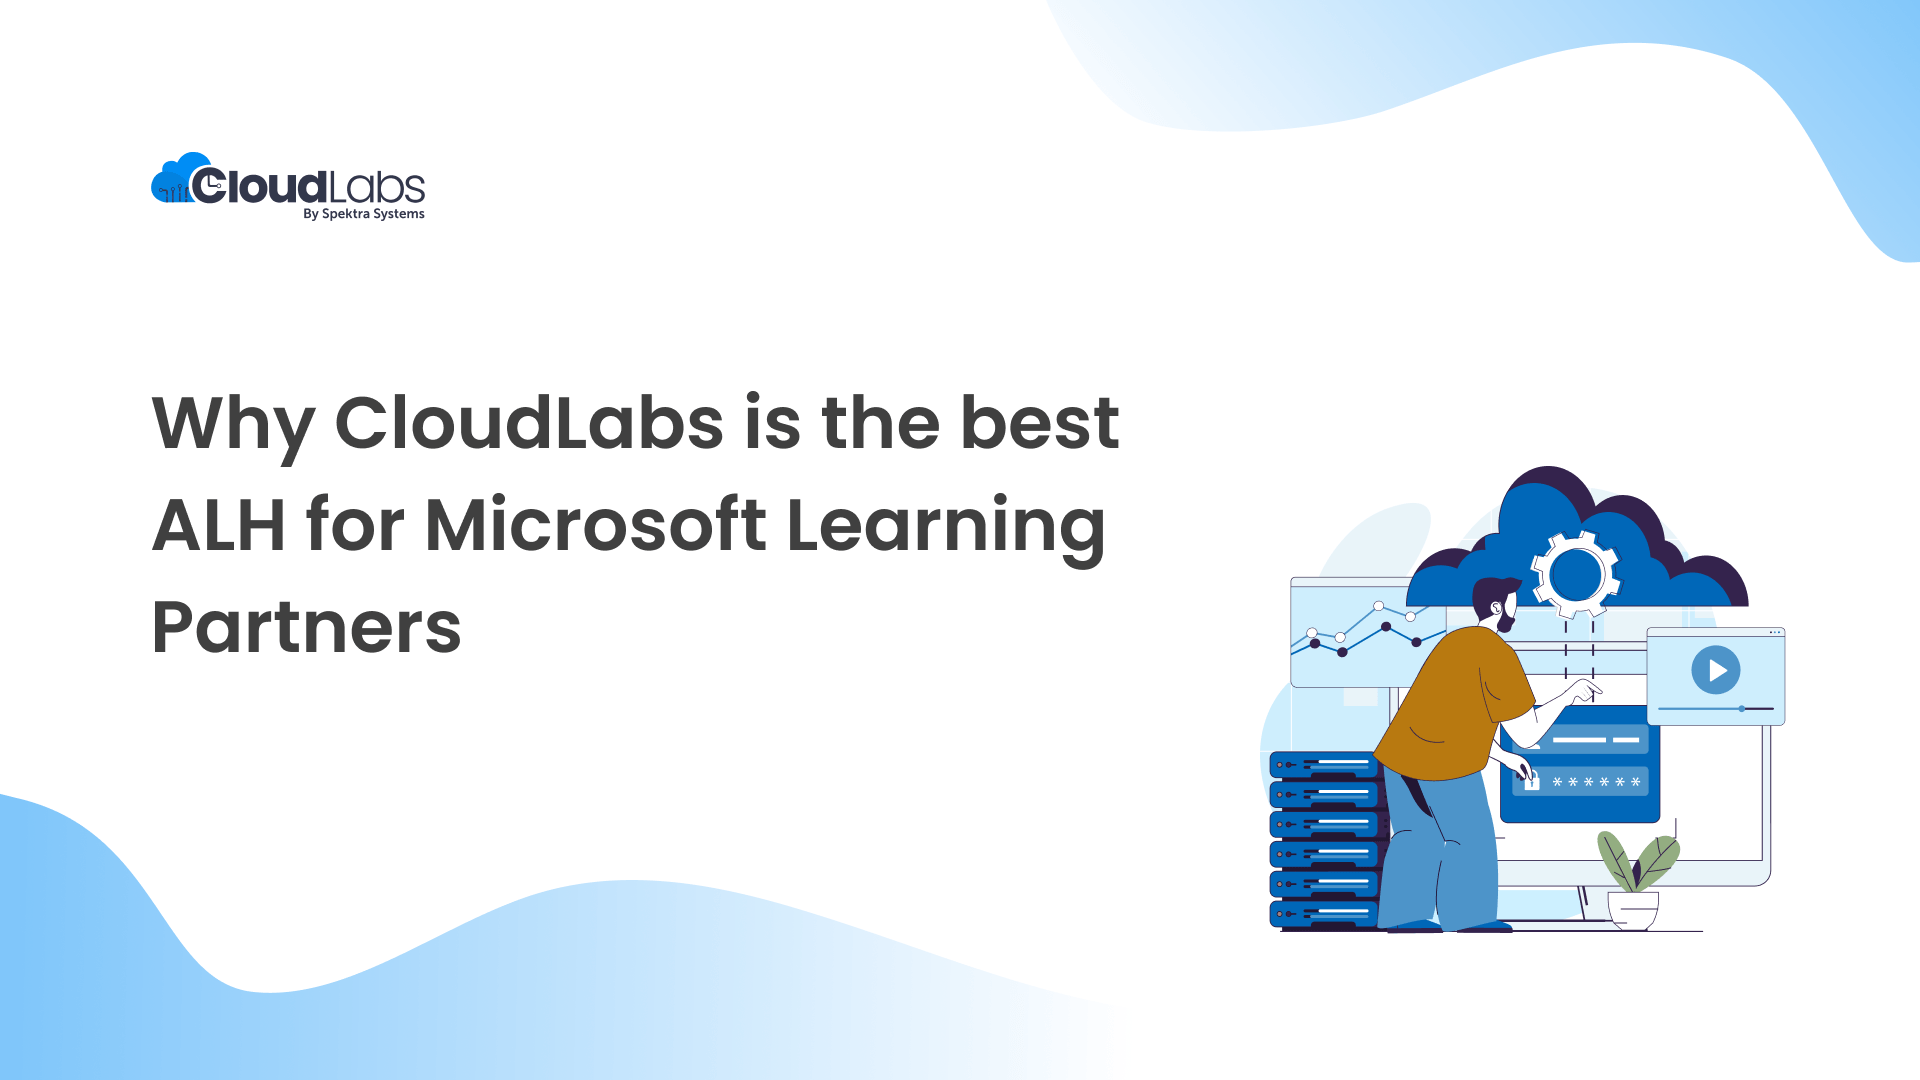 Why CloudLabs is the best ALH for Microsoft Learning Partners